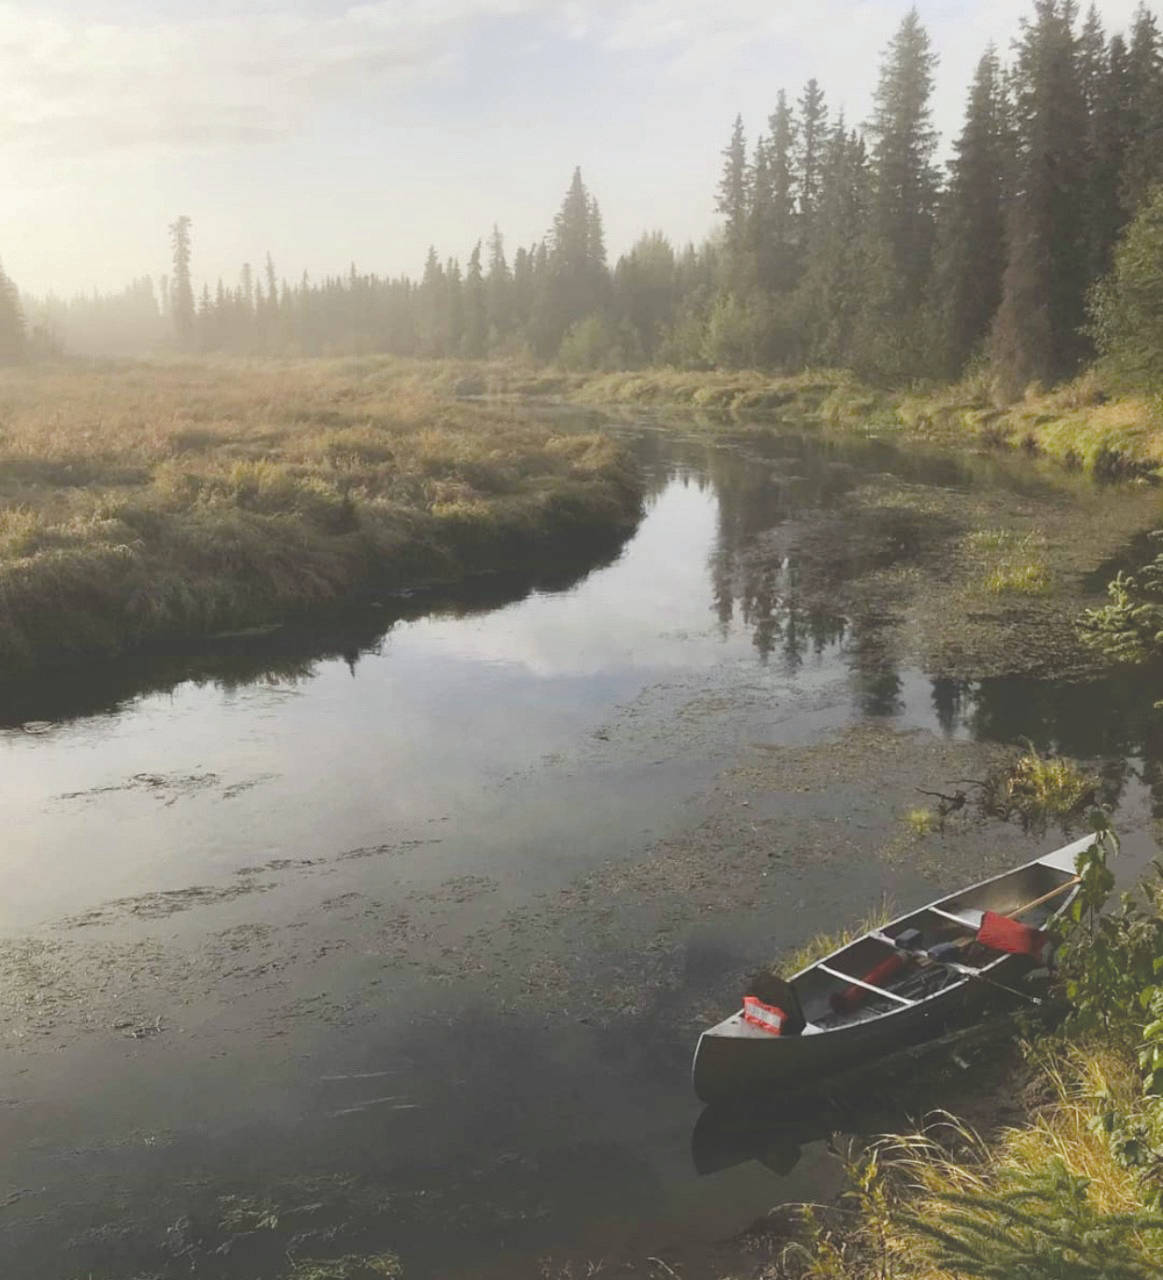 In addition to hiking trails, the Kenai National Wildlife trail crew maintains canoe trails in the Swanson and Swan canoe trail routes as well as the Swanson River. (Photo by Kasey Renfro/Kenai National Wildlife Refuge)